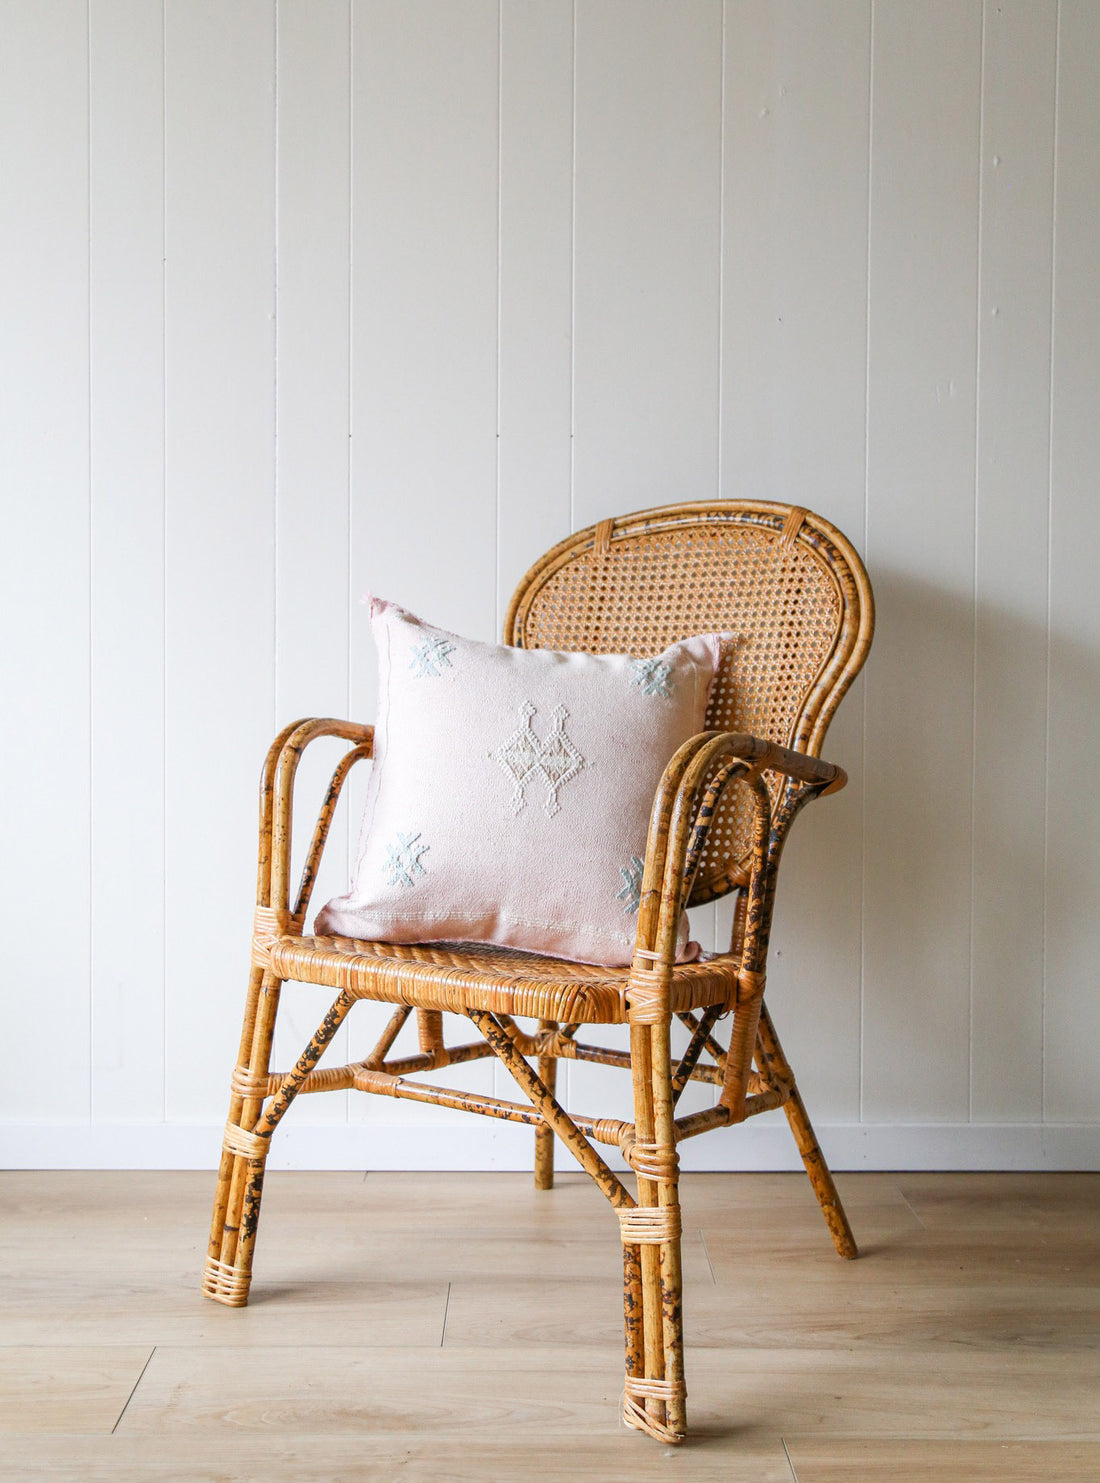 Vintage rattan chair in Vancouver, from Alma Home & Vintage